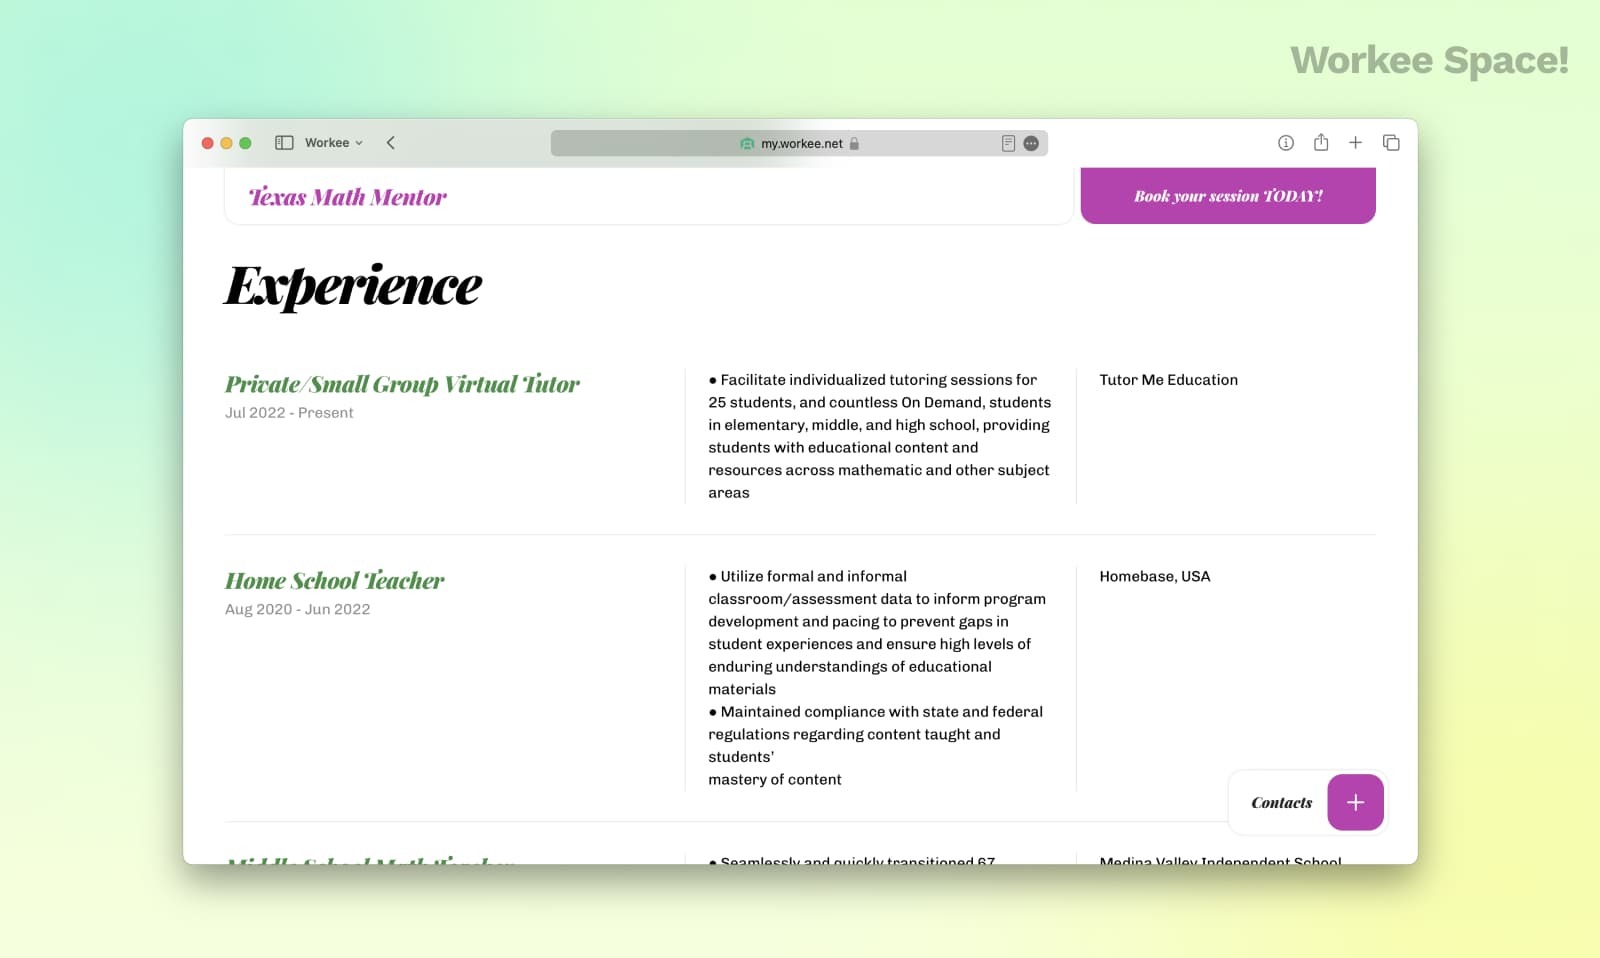 How to boost your experience section to gain visibility on Workee Space